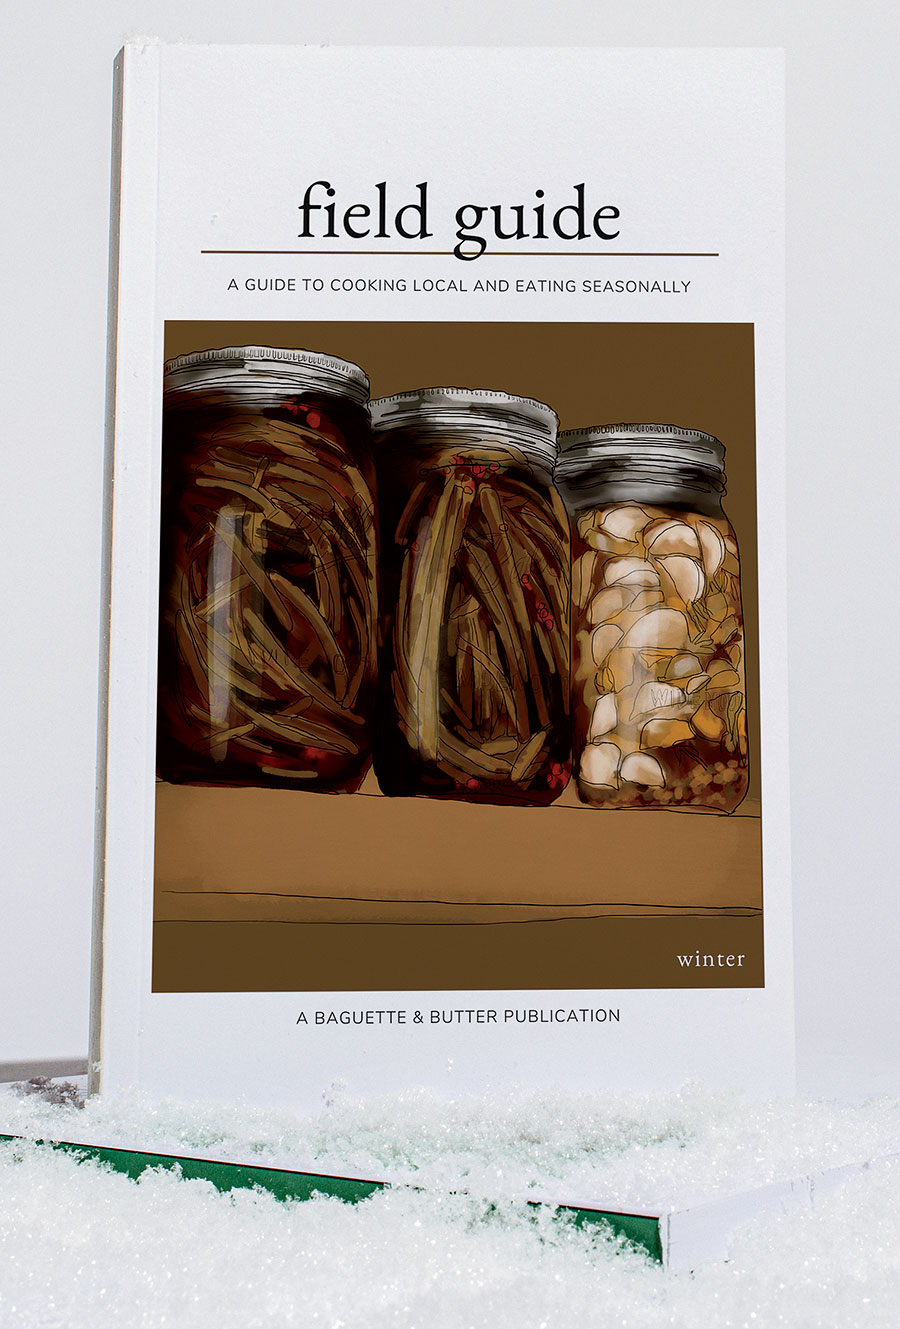 Field Guide from Baguette & Butter